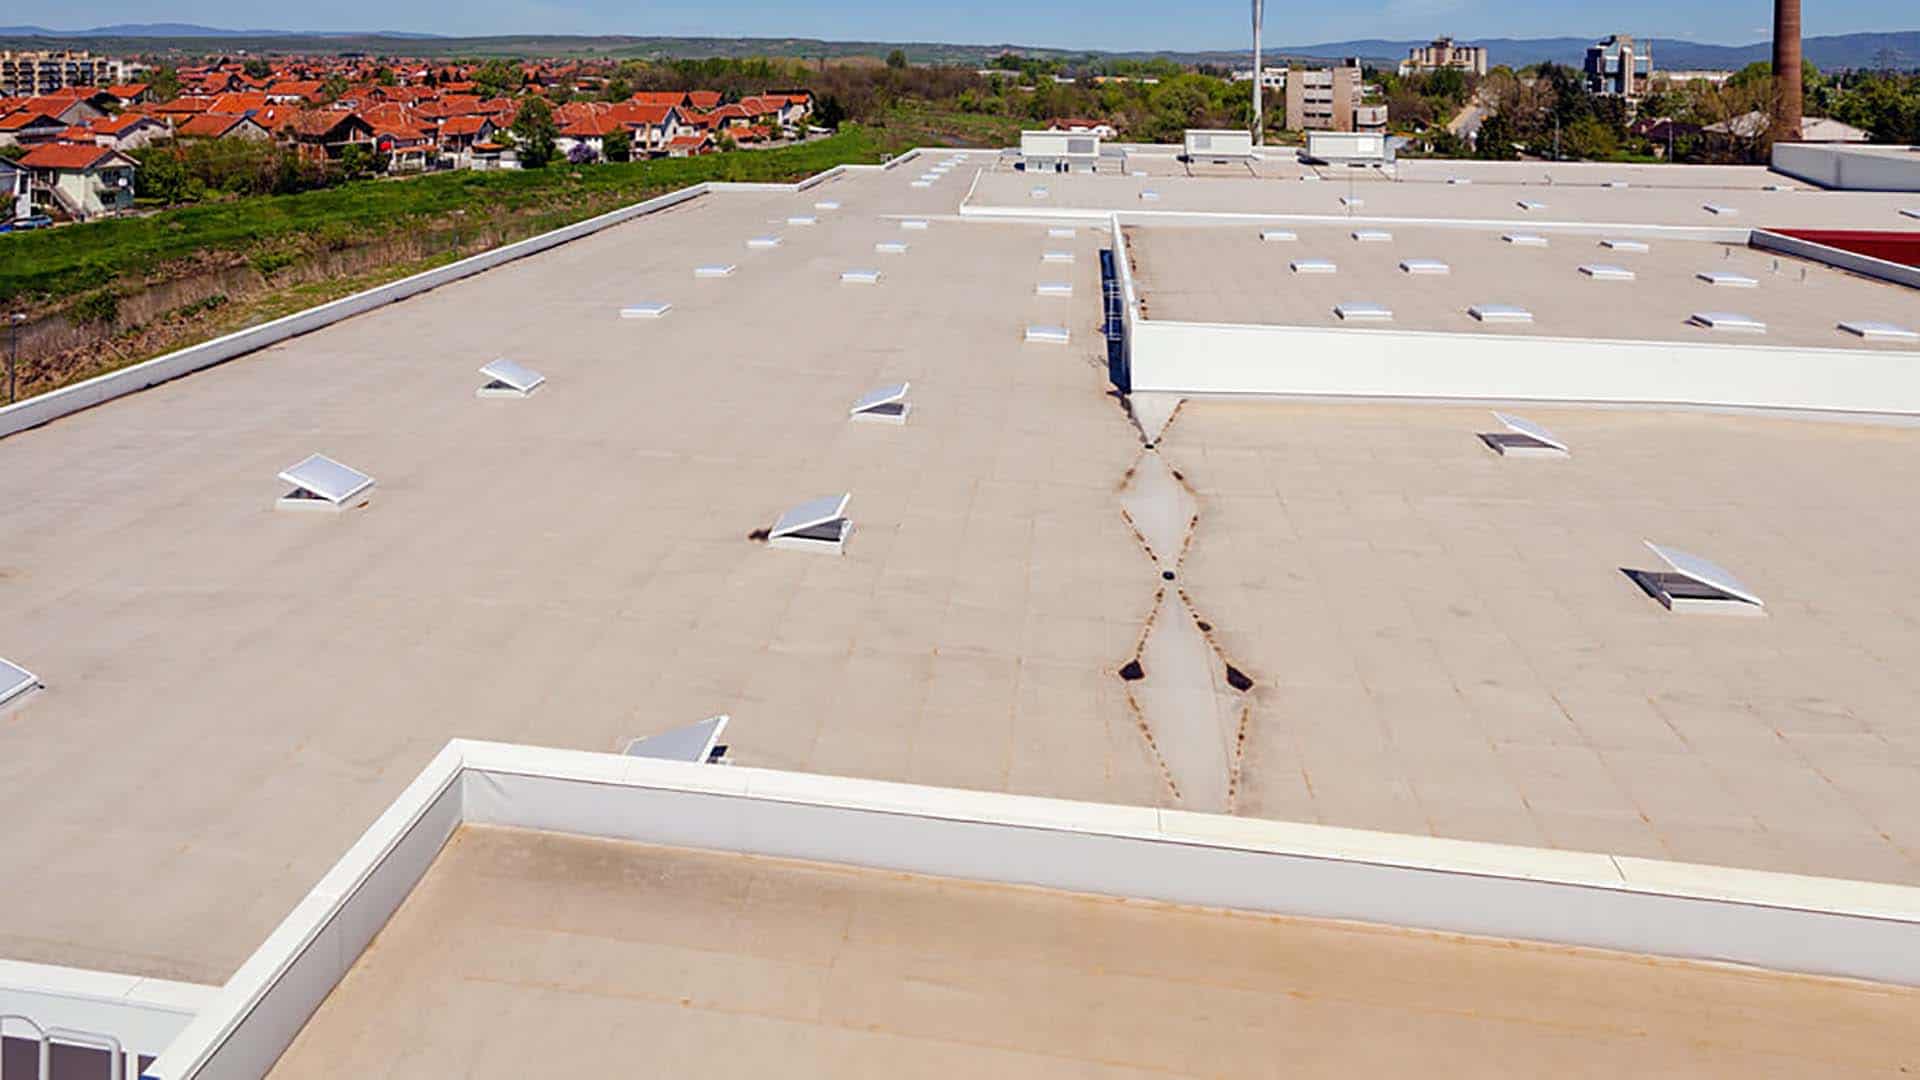 Flat roof on a commercial building in Omaha